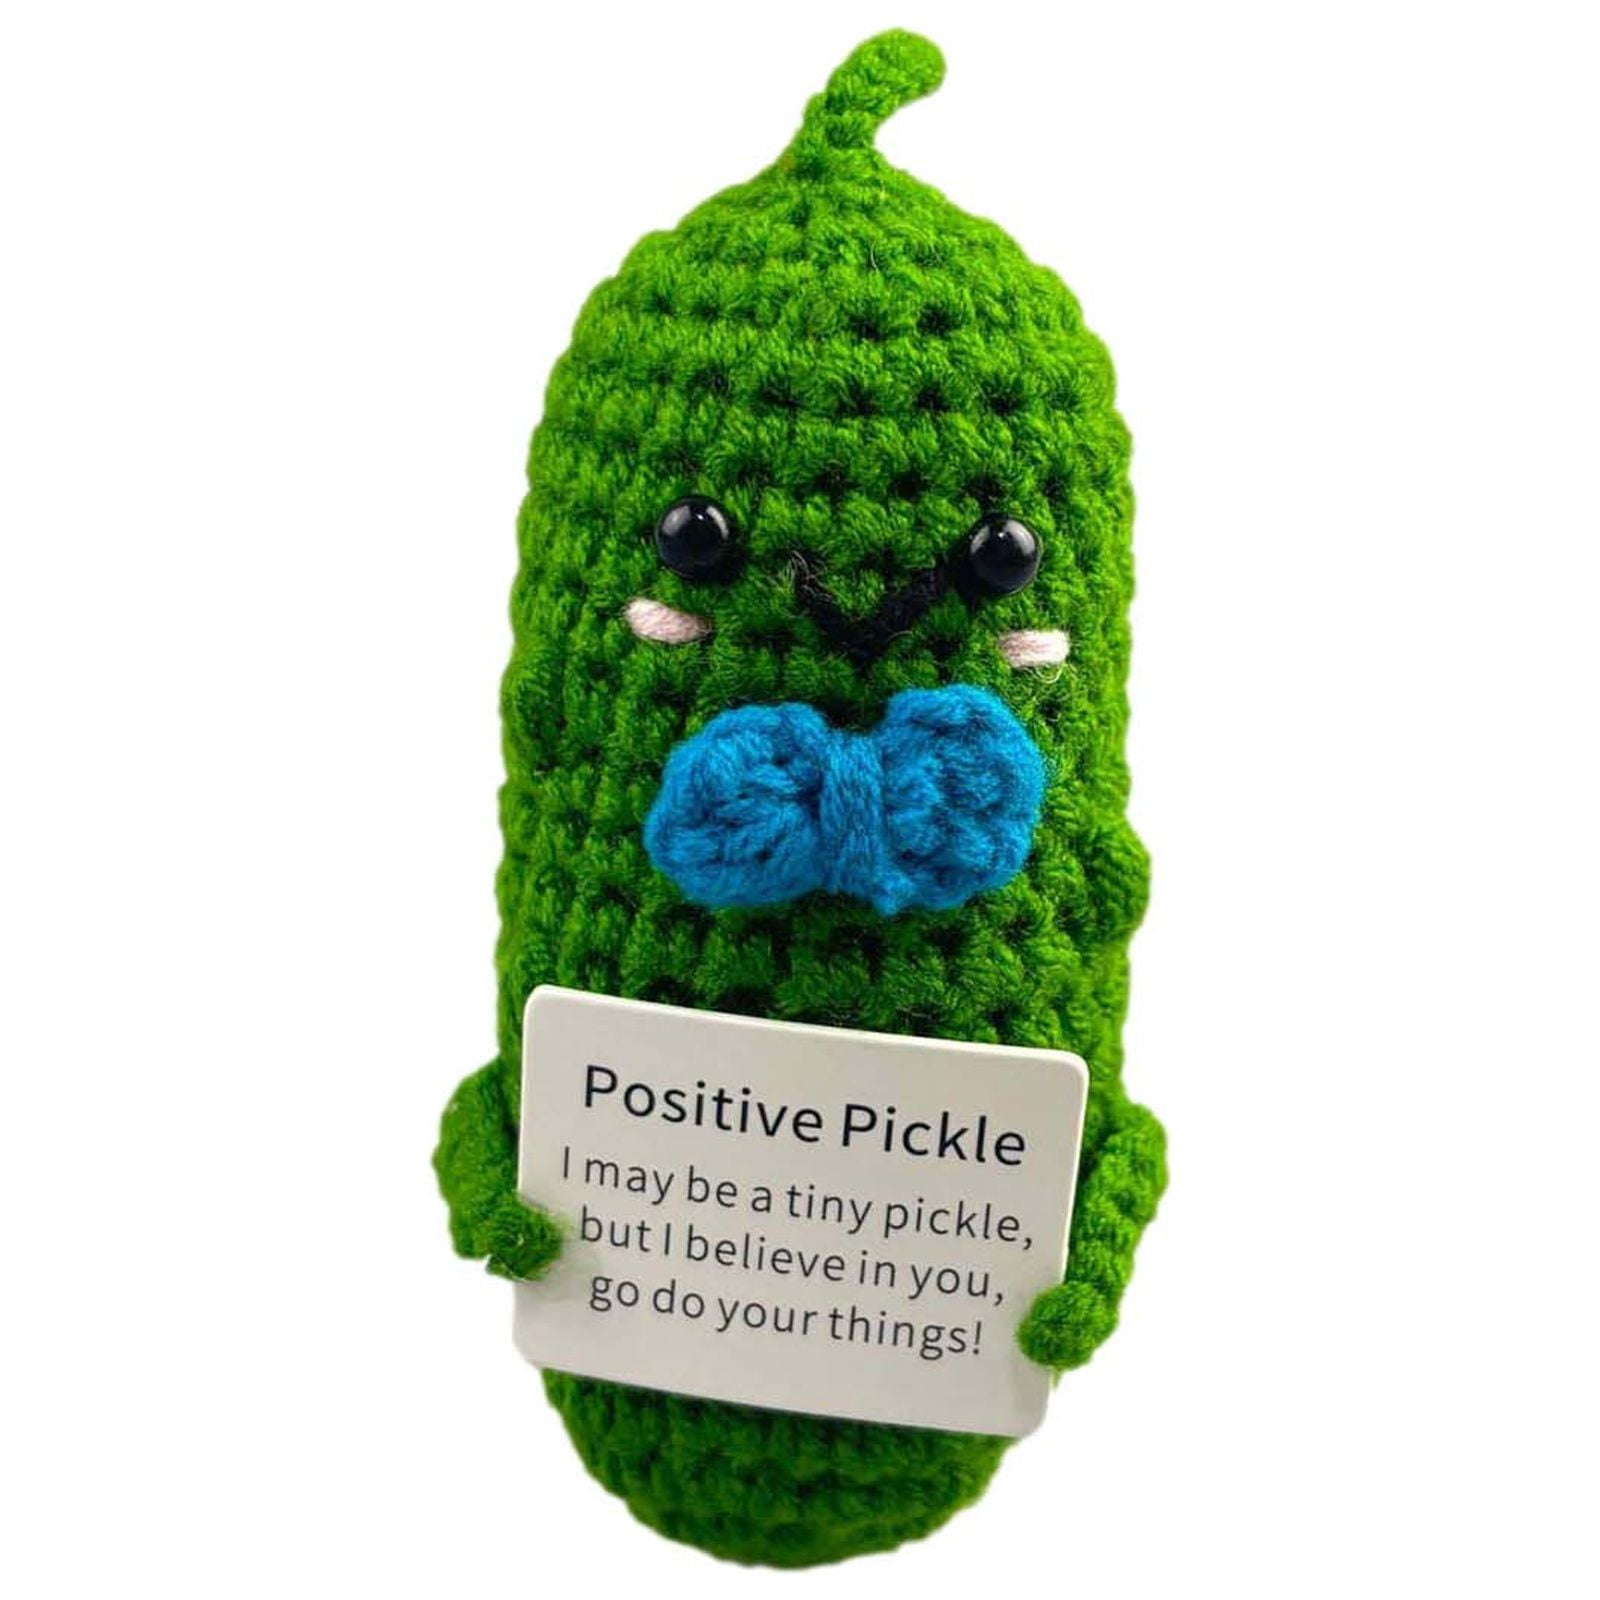  Coxolx Emotional Support Pickle, Positive Pickle Plush Positive  Potato, Handmade Funny Pickle Gift, Knitted Pickle Stuffed Pickle Cucumber  Knitting Doll, Best Gifts for Friends (Red Potatoes) : Toys & Games